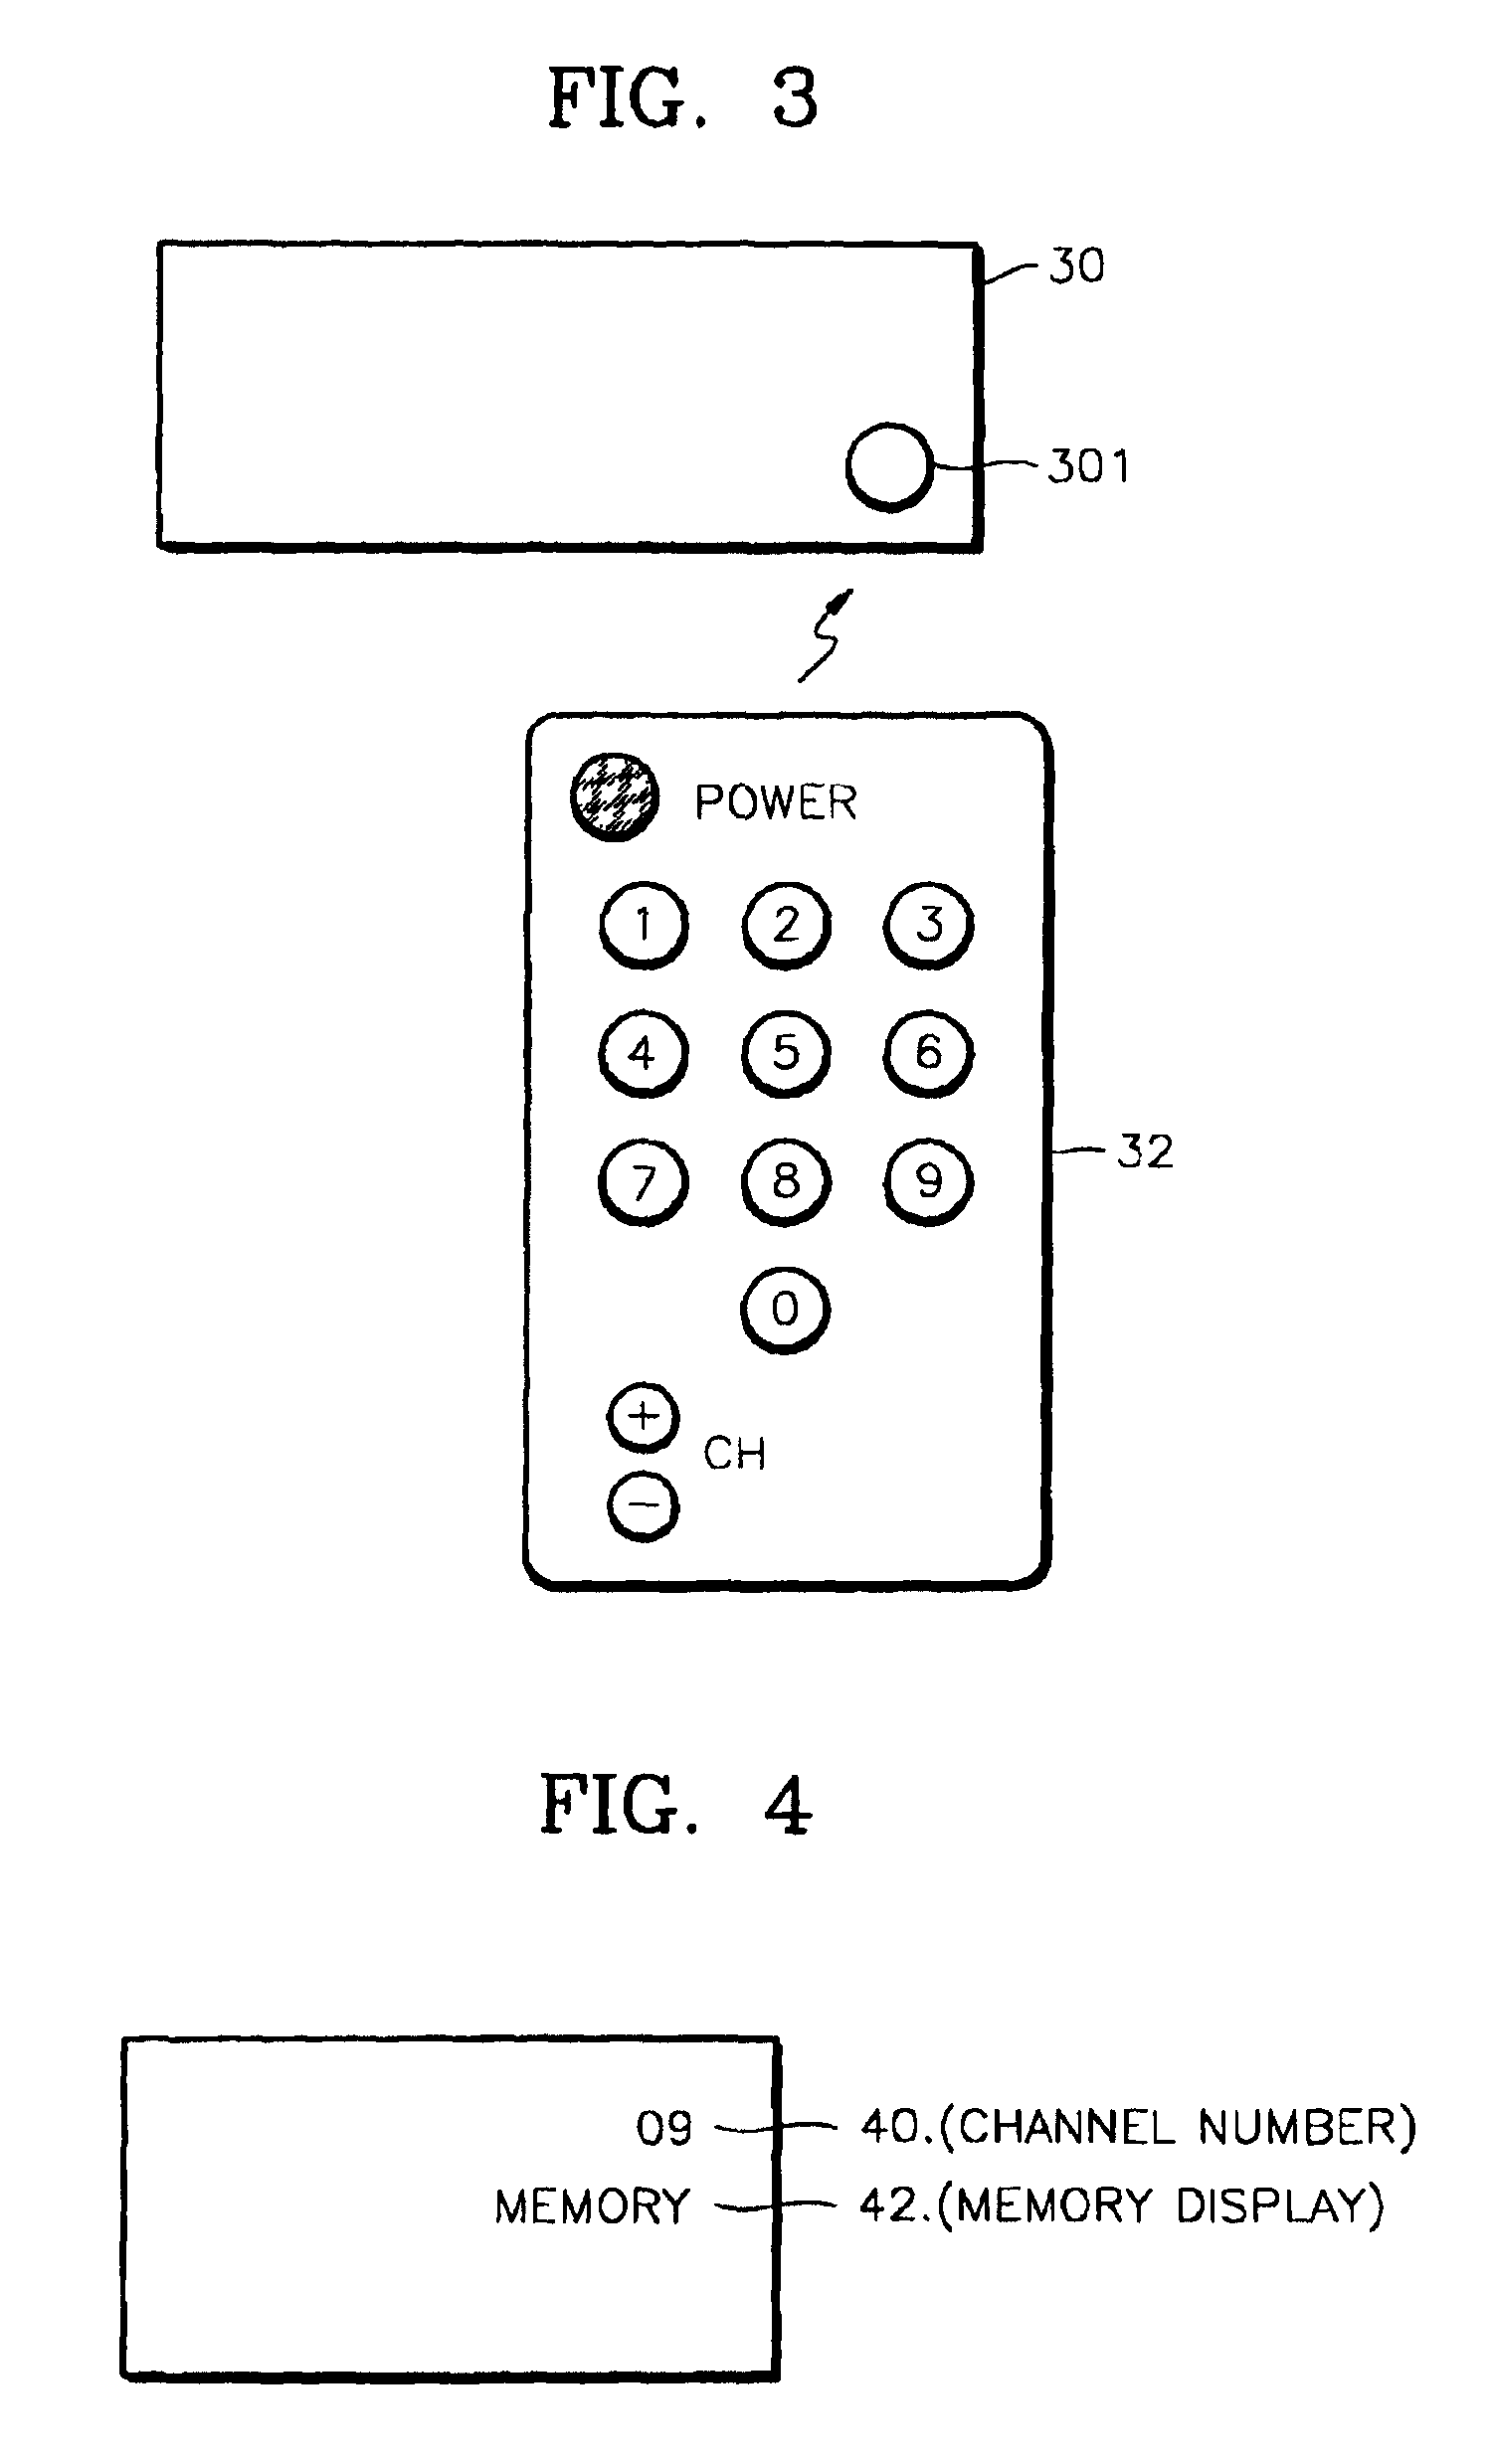 Automatic channel memory device